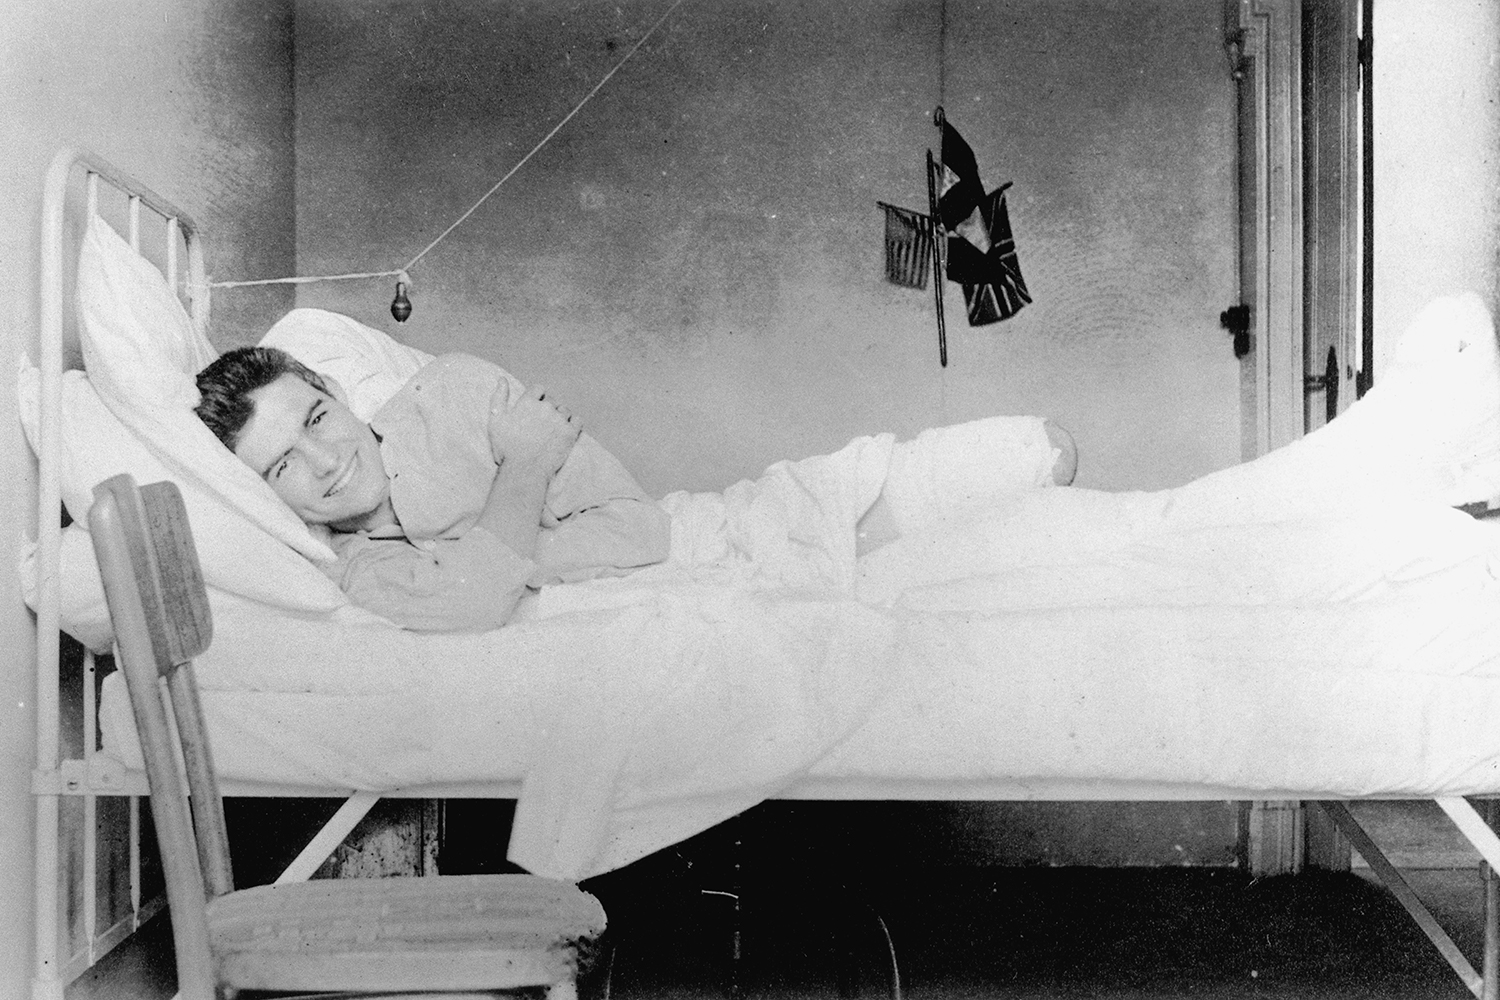 Ernest Hemingway recovering from injuries at the American Red Cross Hospital in Milan, Italy, 1918